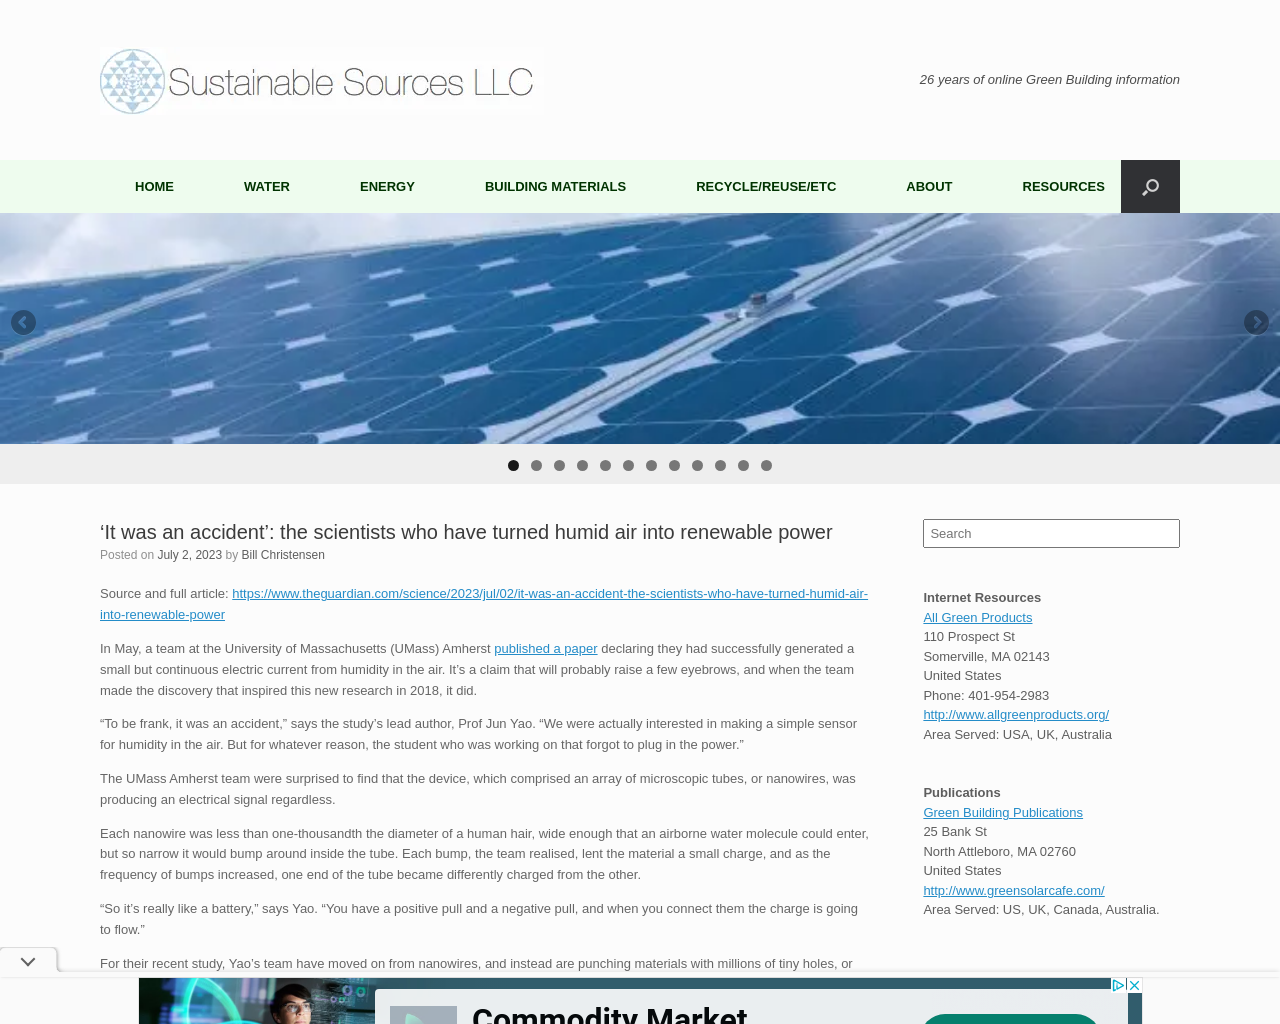 sustainablesources.com